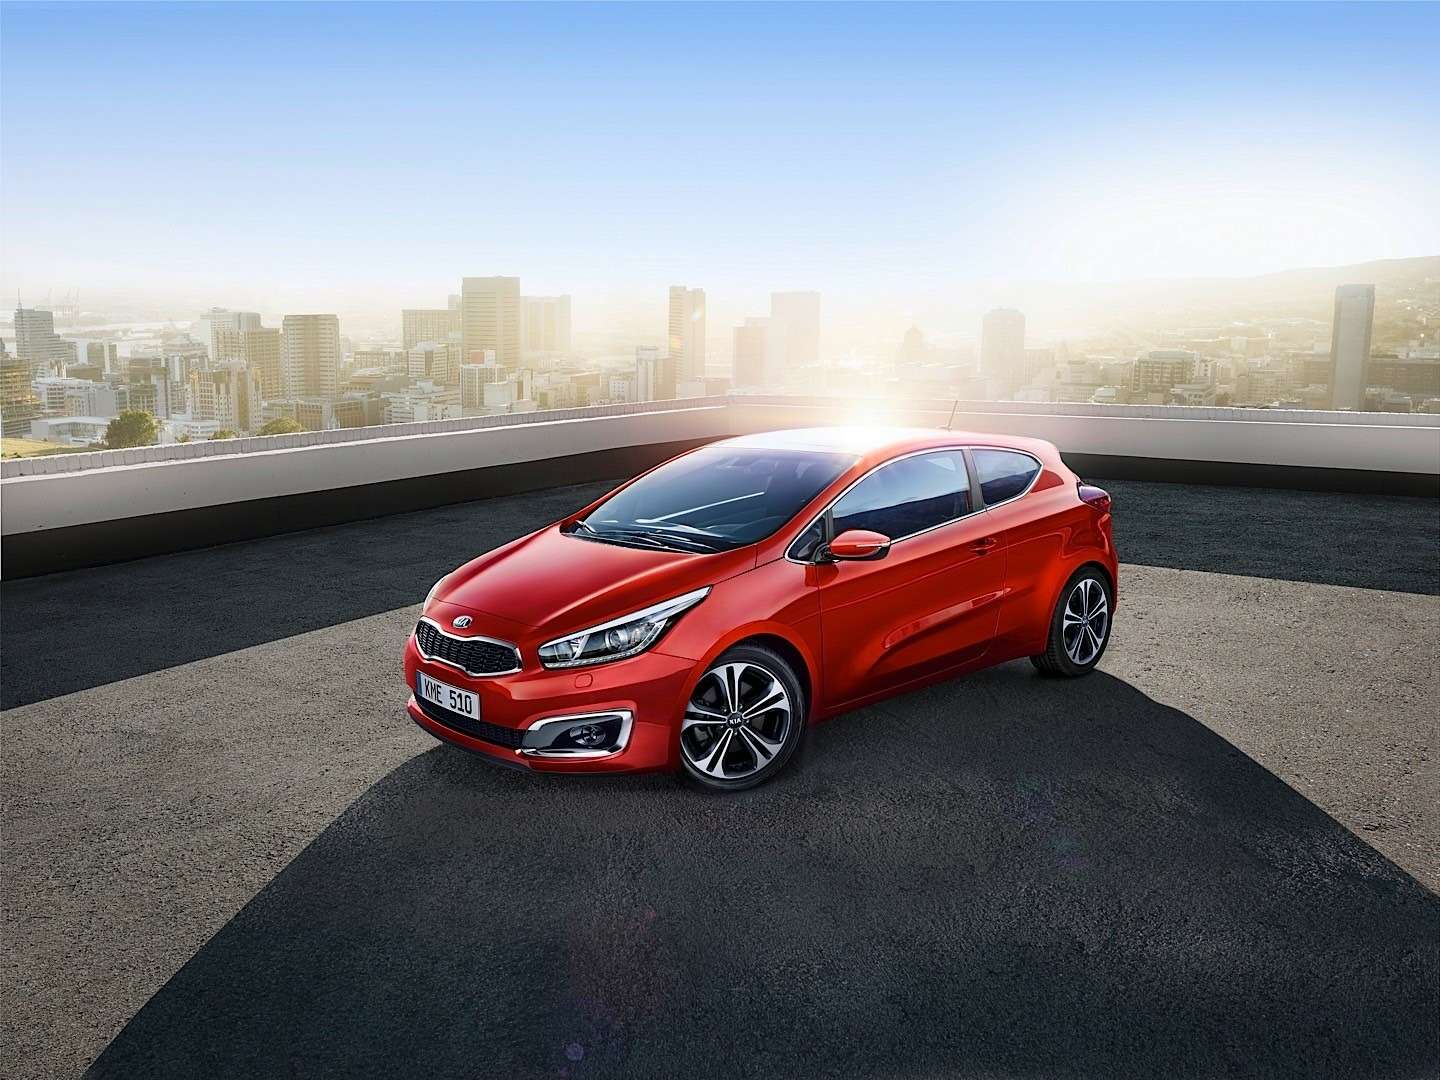 2016-kia-cee-d-brings-subtle-visual-upgrades-new-engines-and-sporty-gt-line-photo-gallery_16